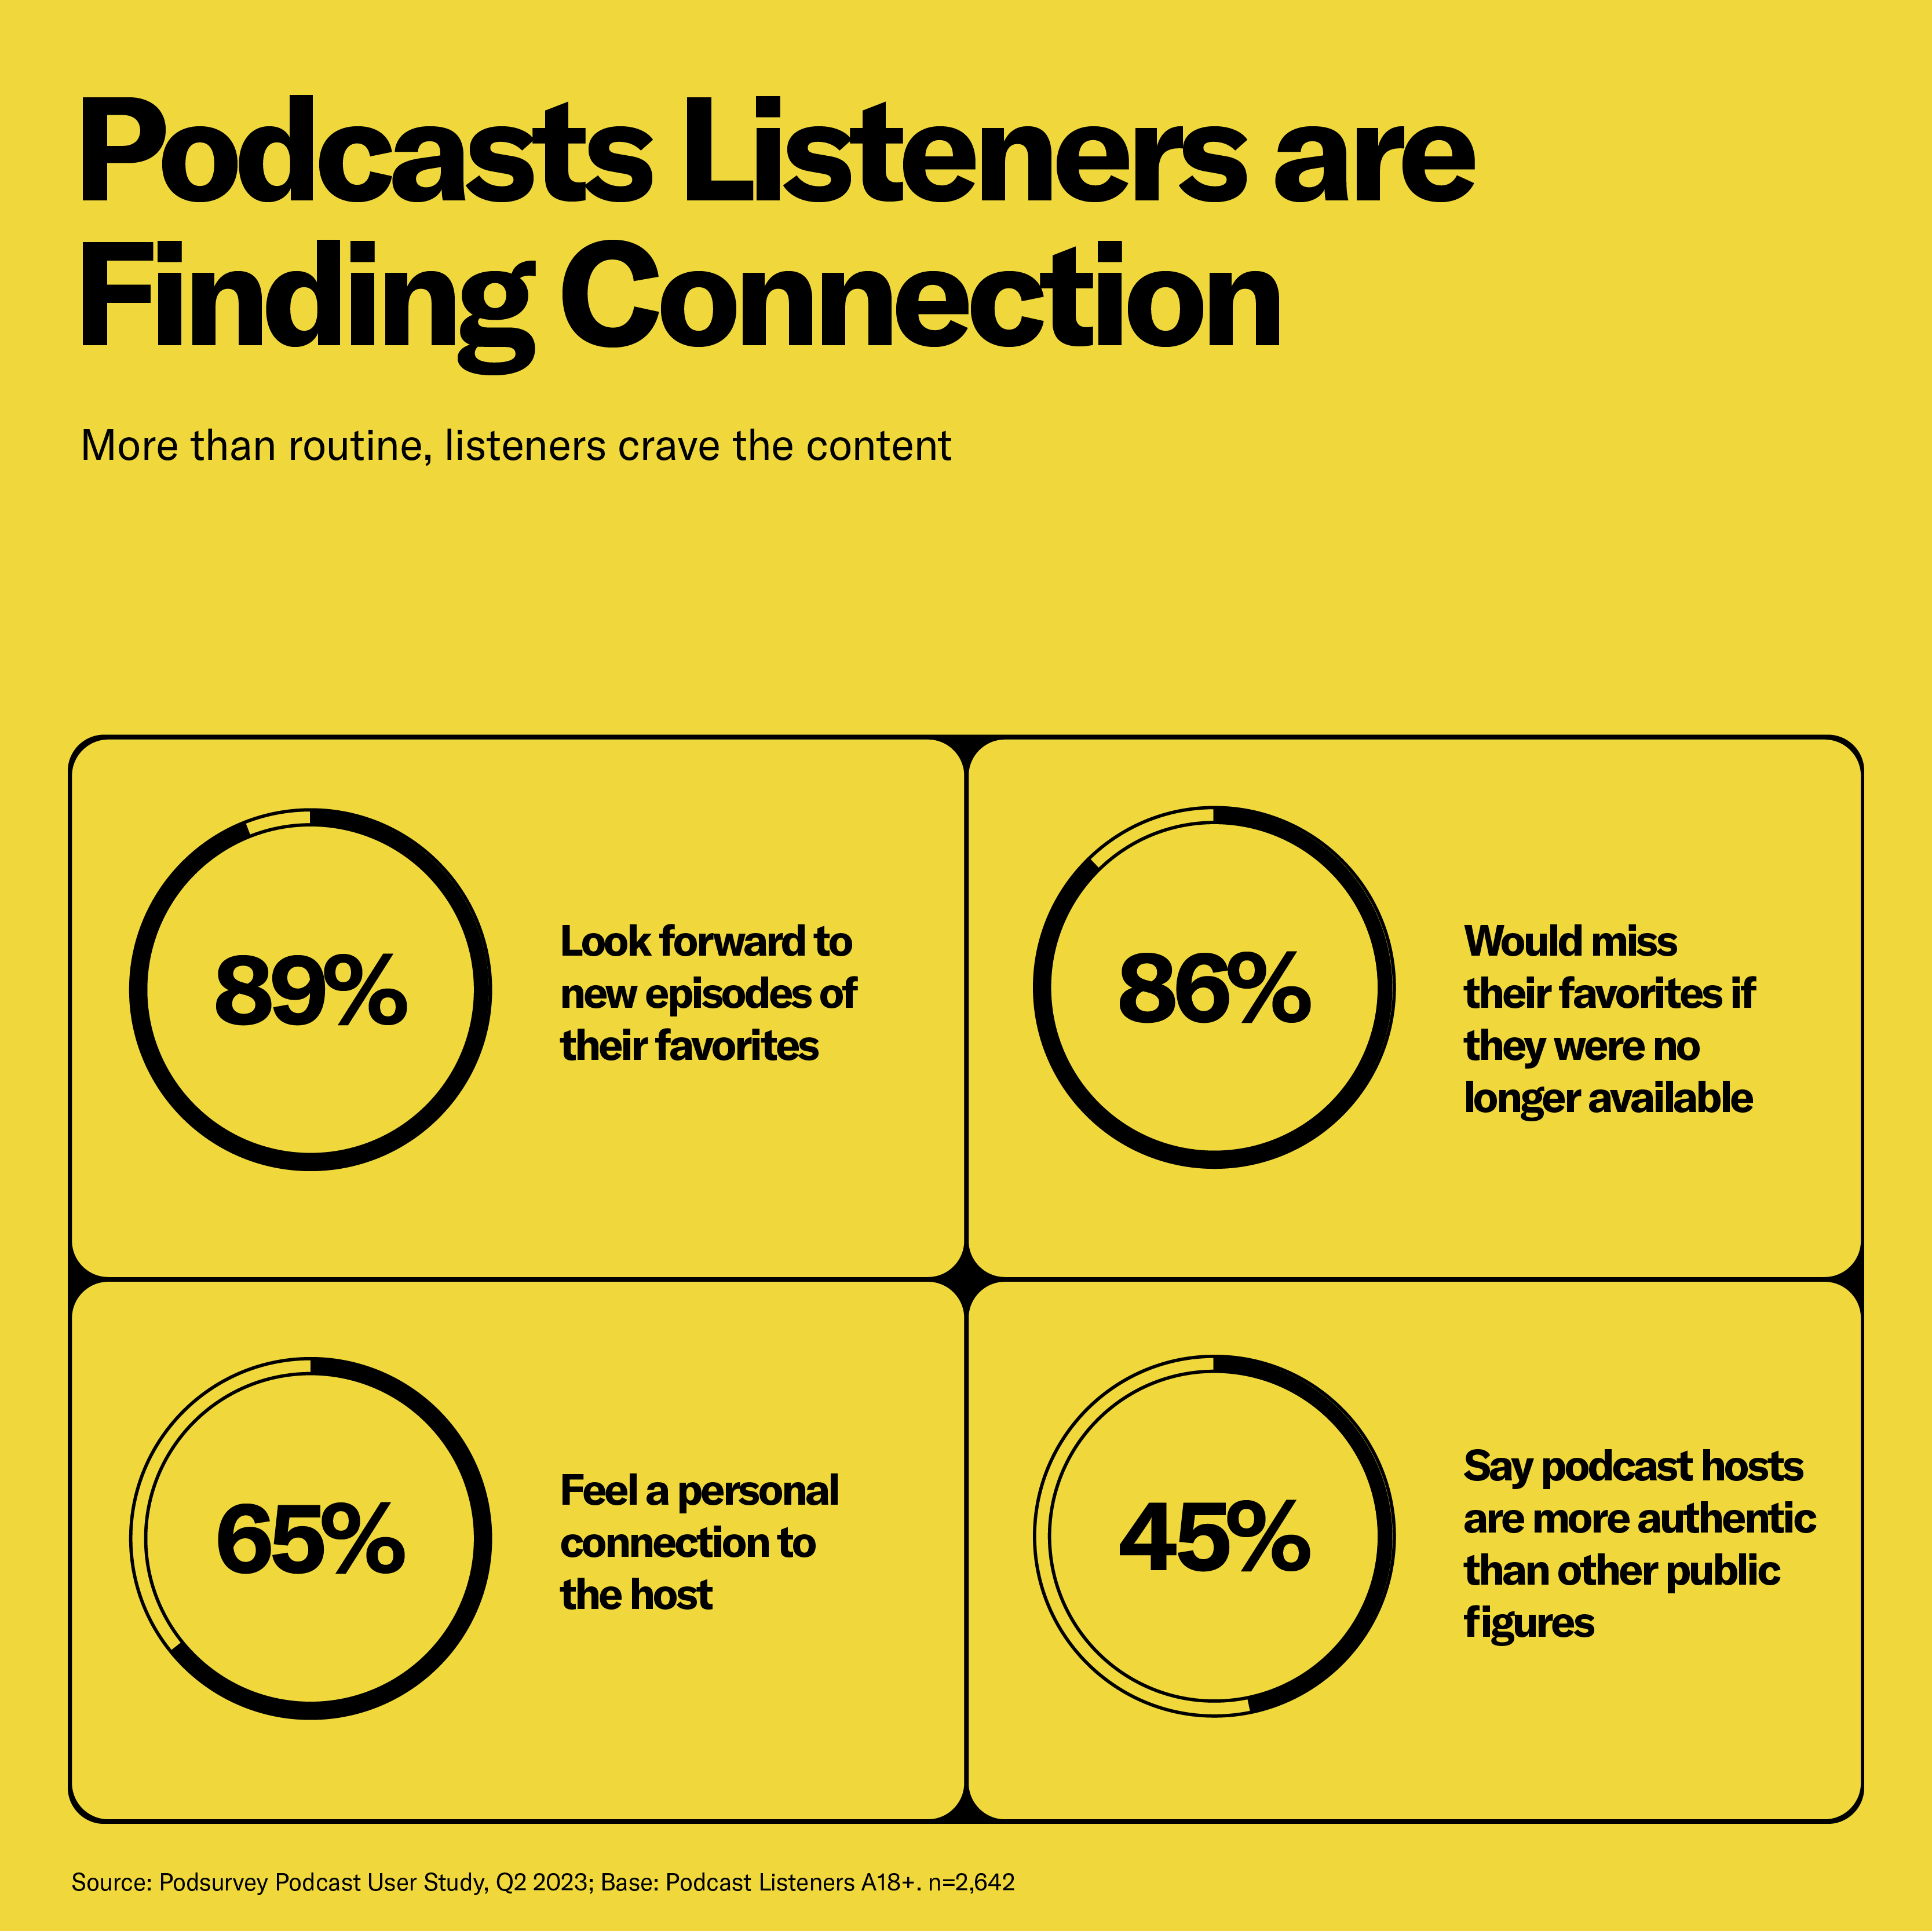 Podcast listeners feel connected to podcast hosts